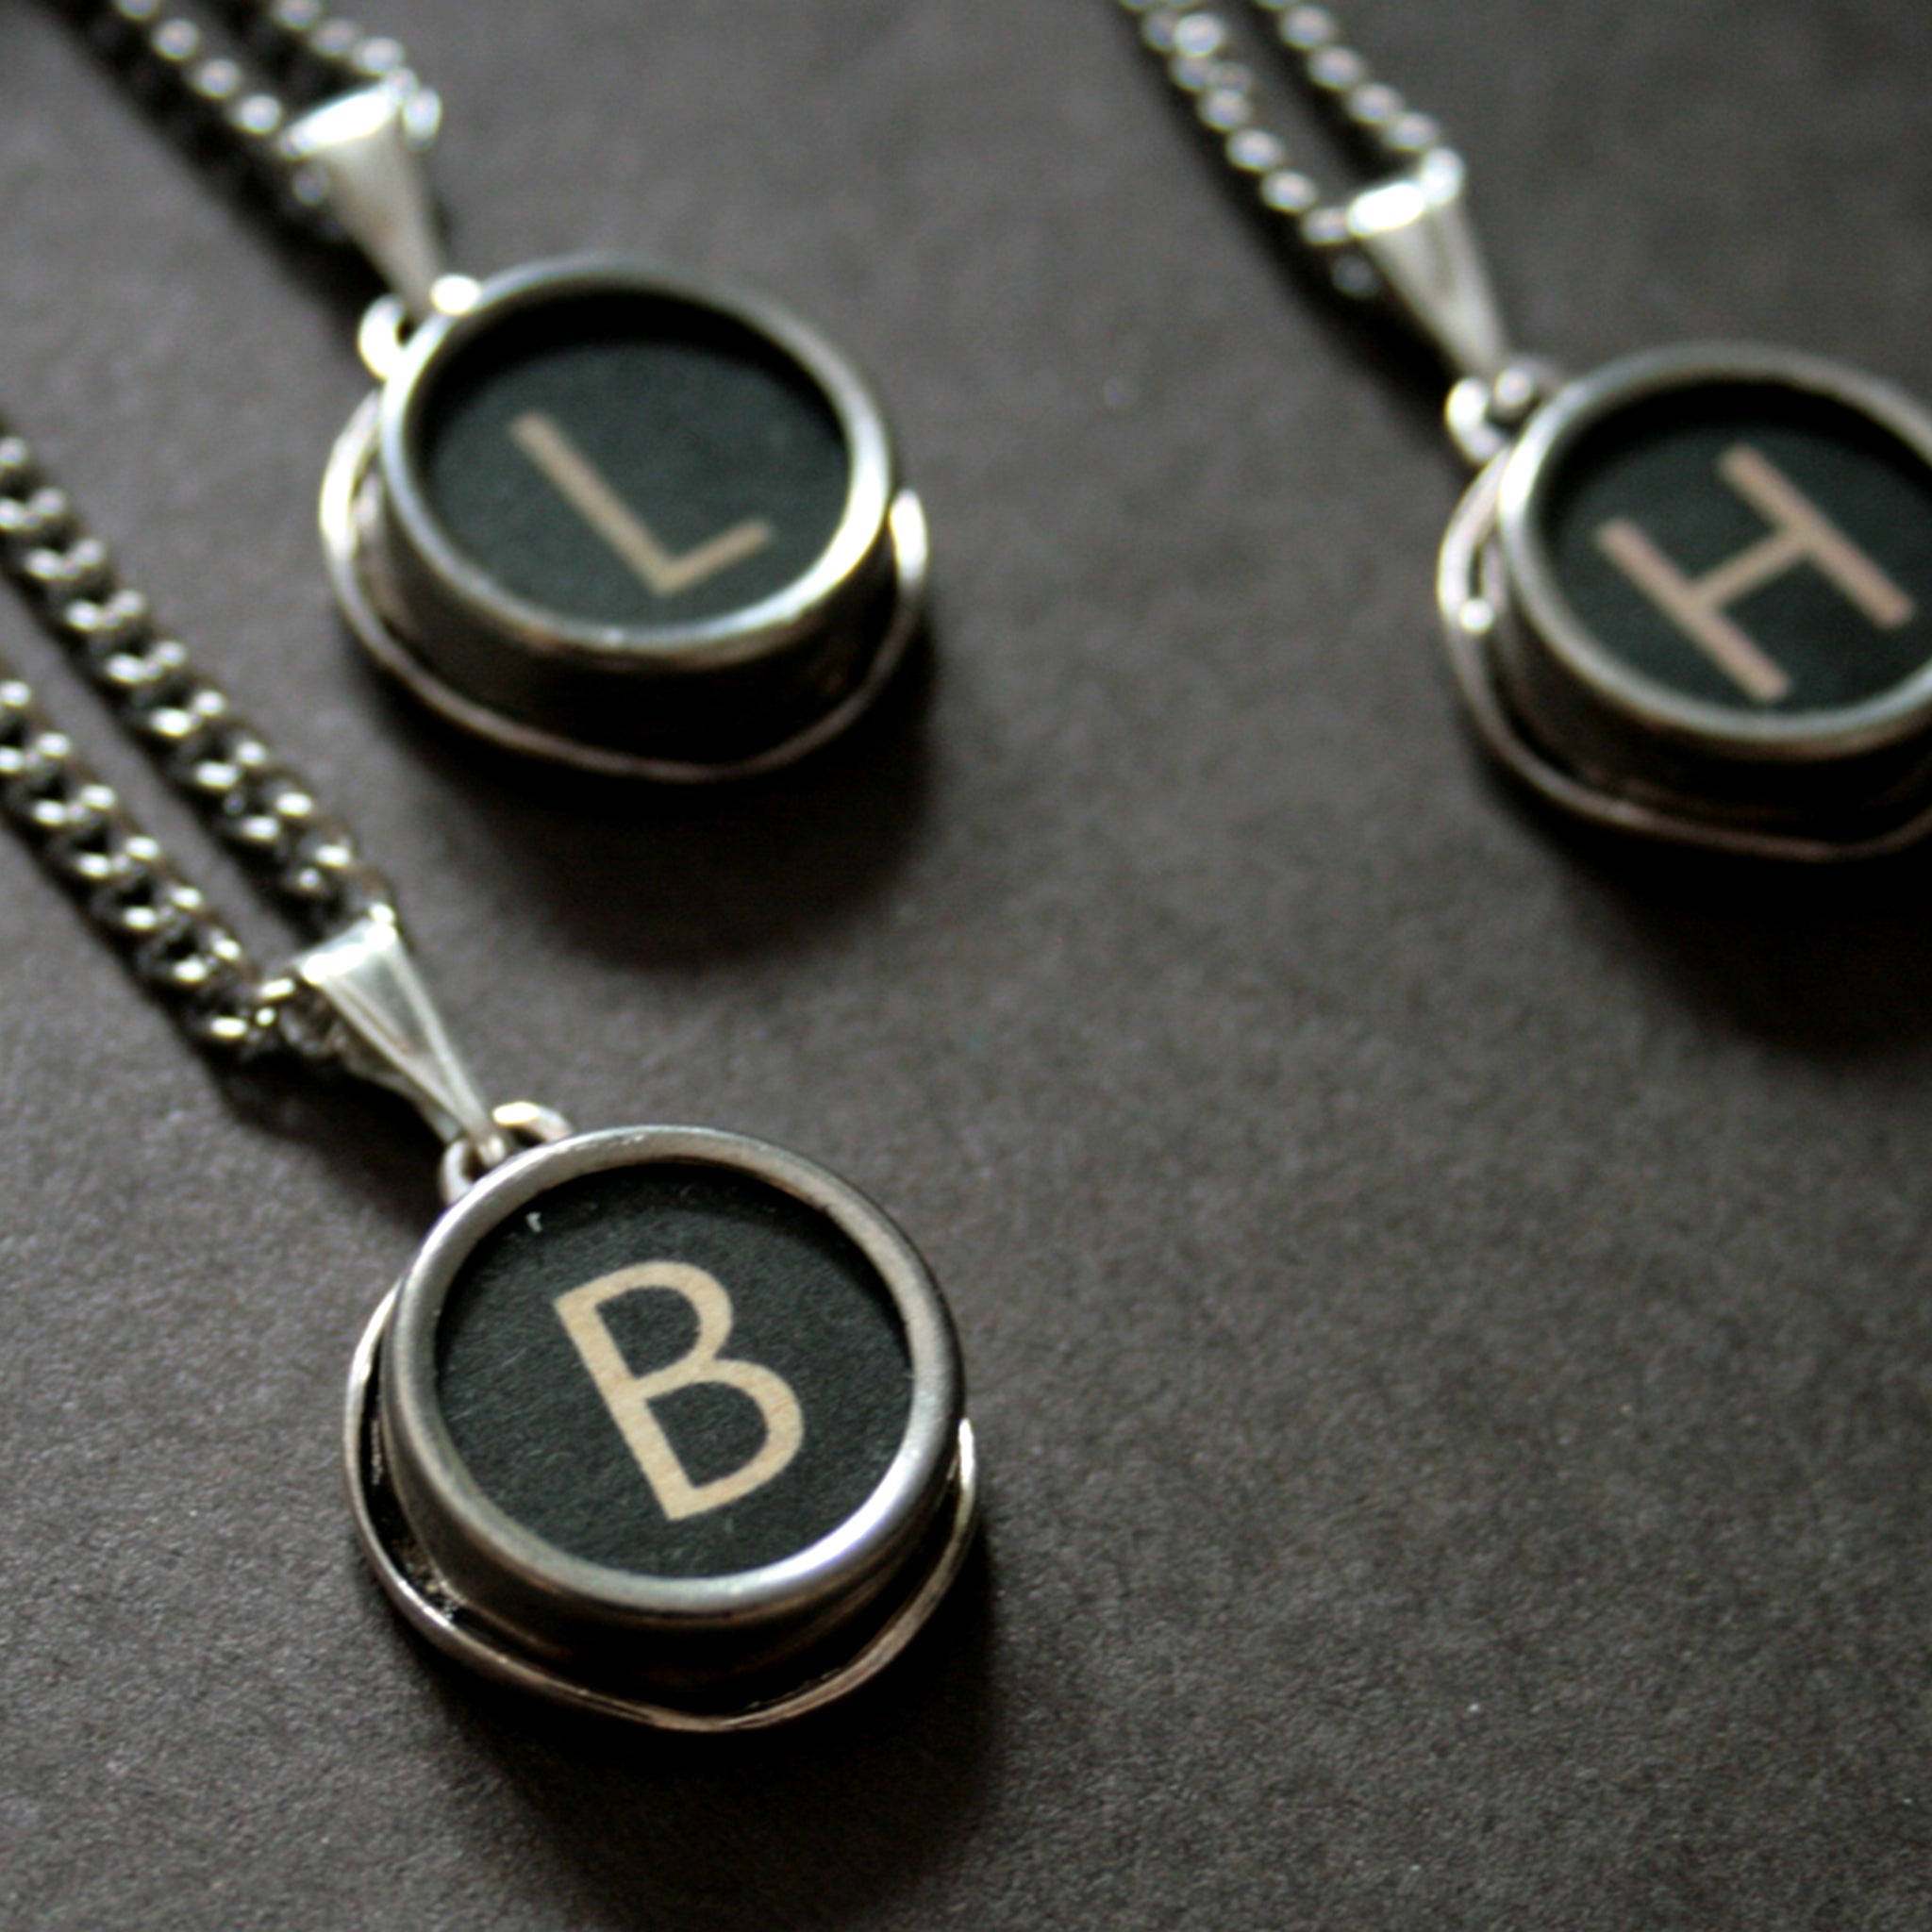 initial necklace made of authentic vintage black typewriter key